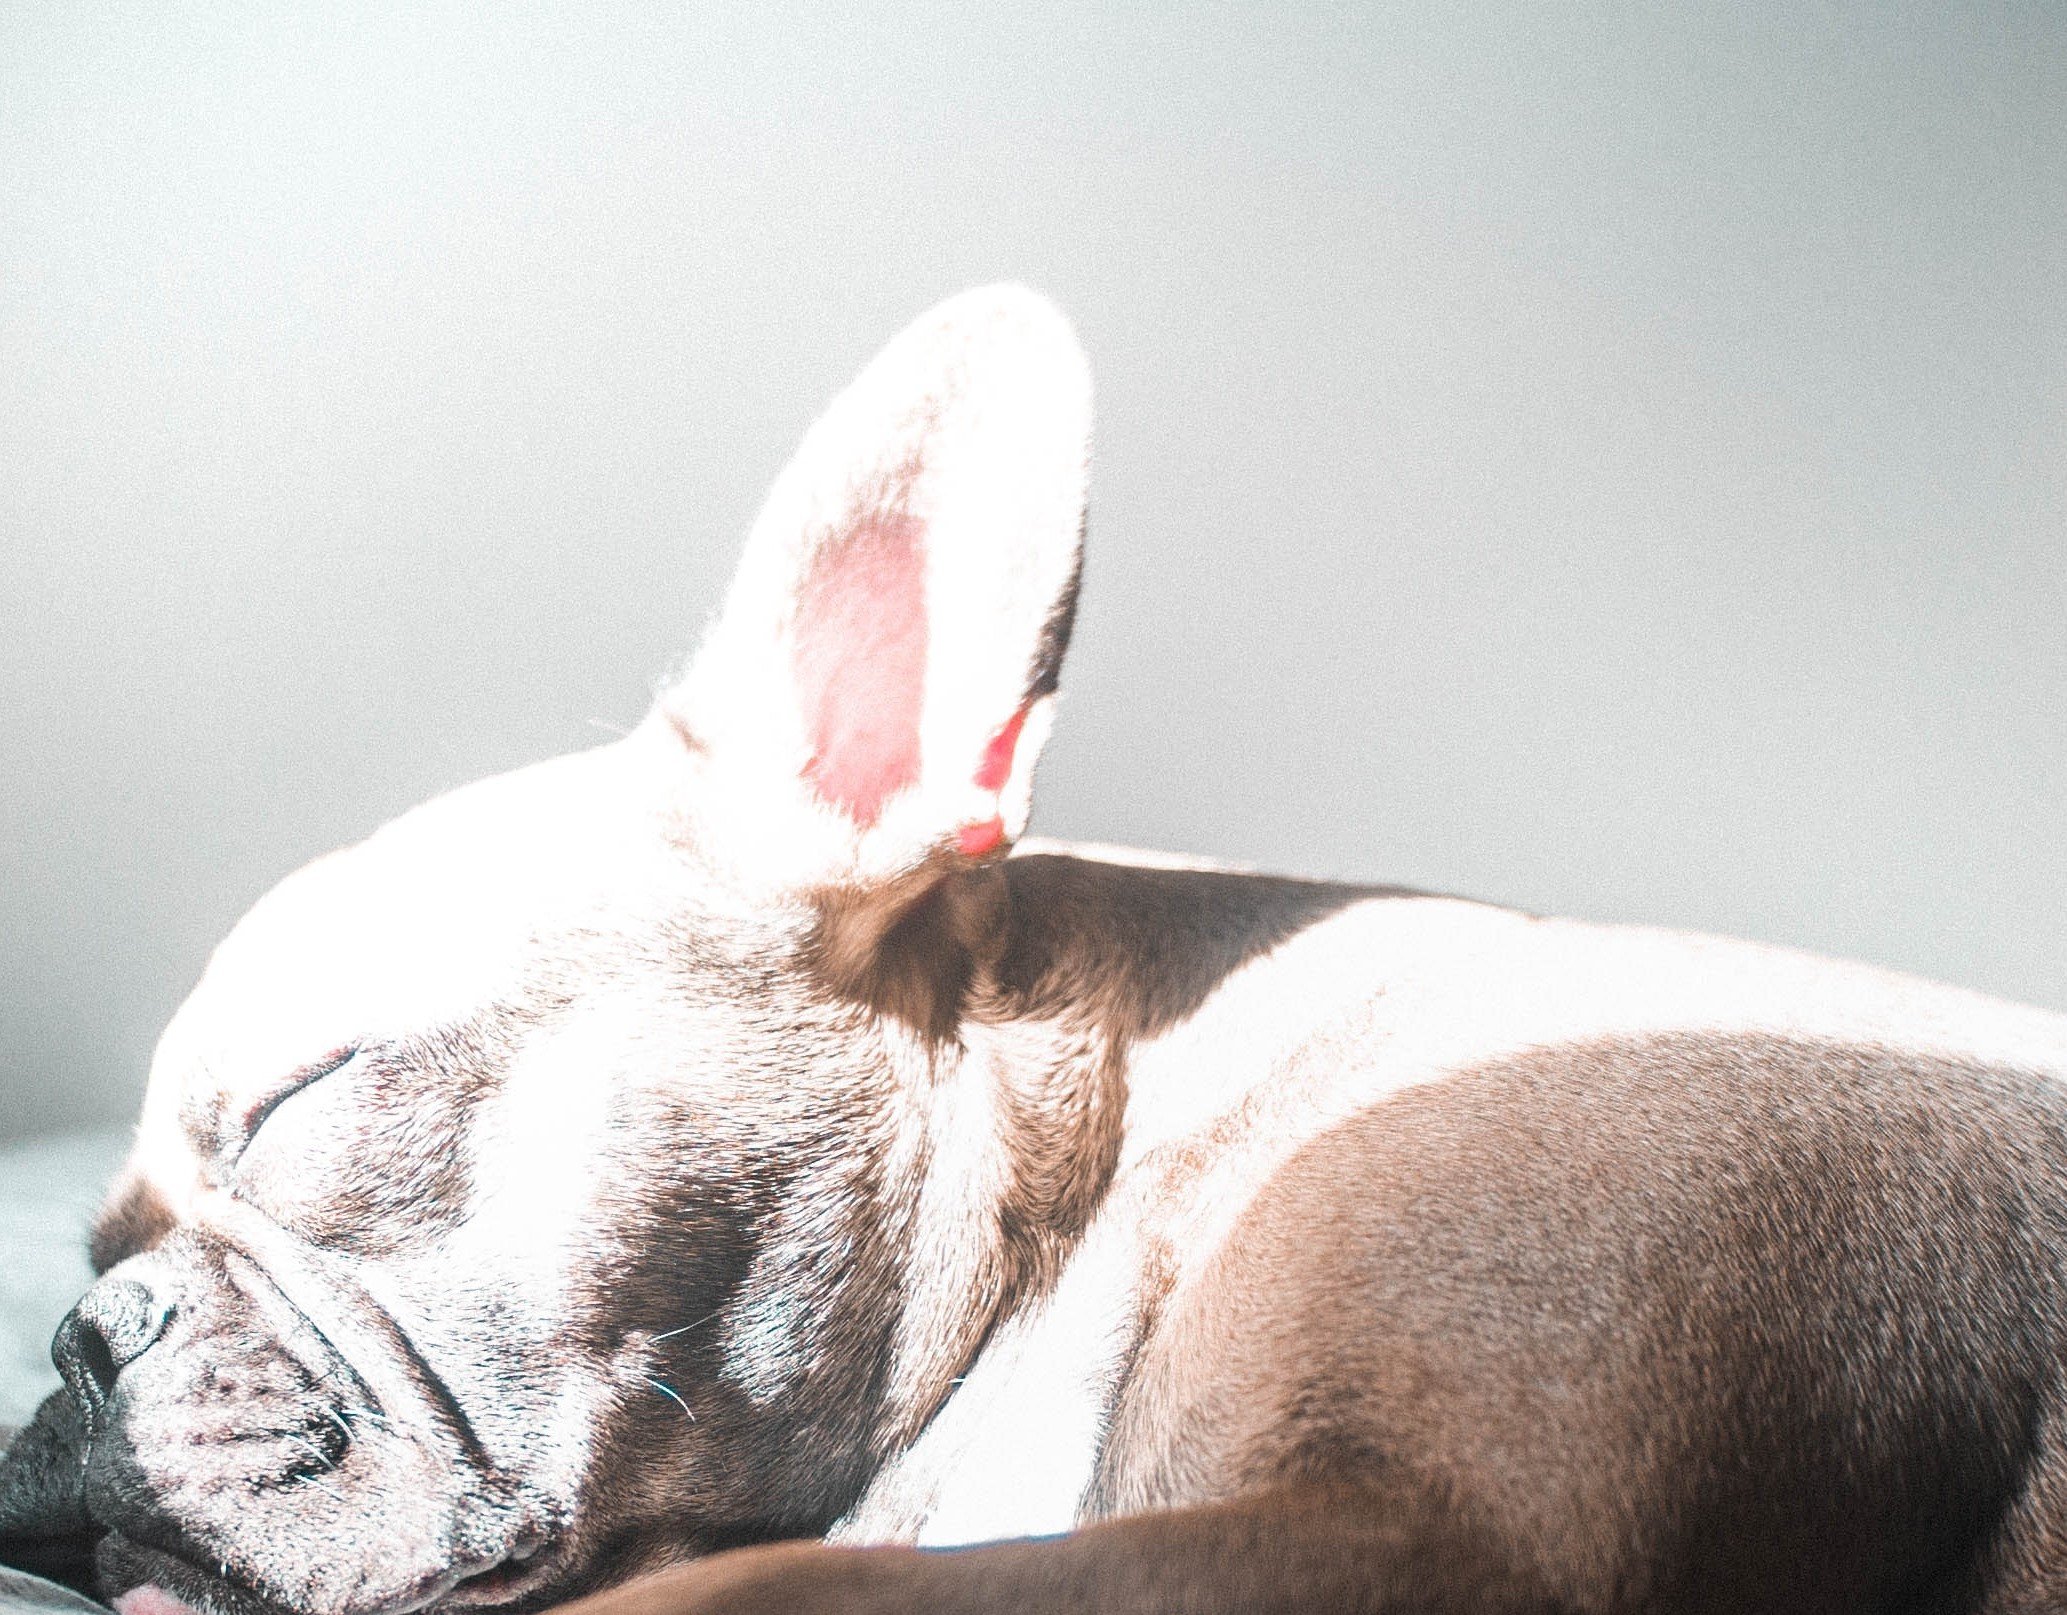 The Burts assumed their Frenchie would be fine in her carrier | Photo: Pexels